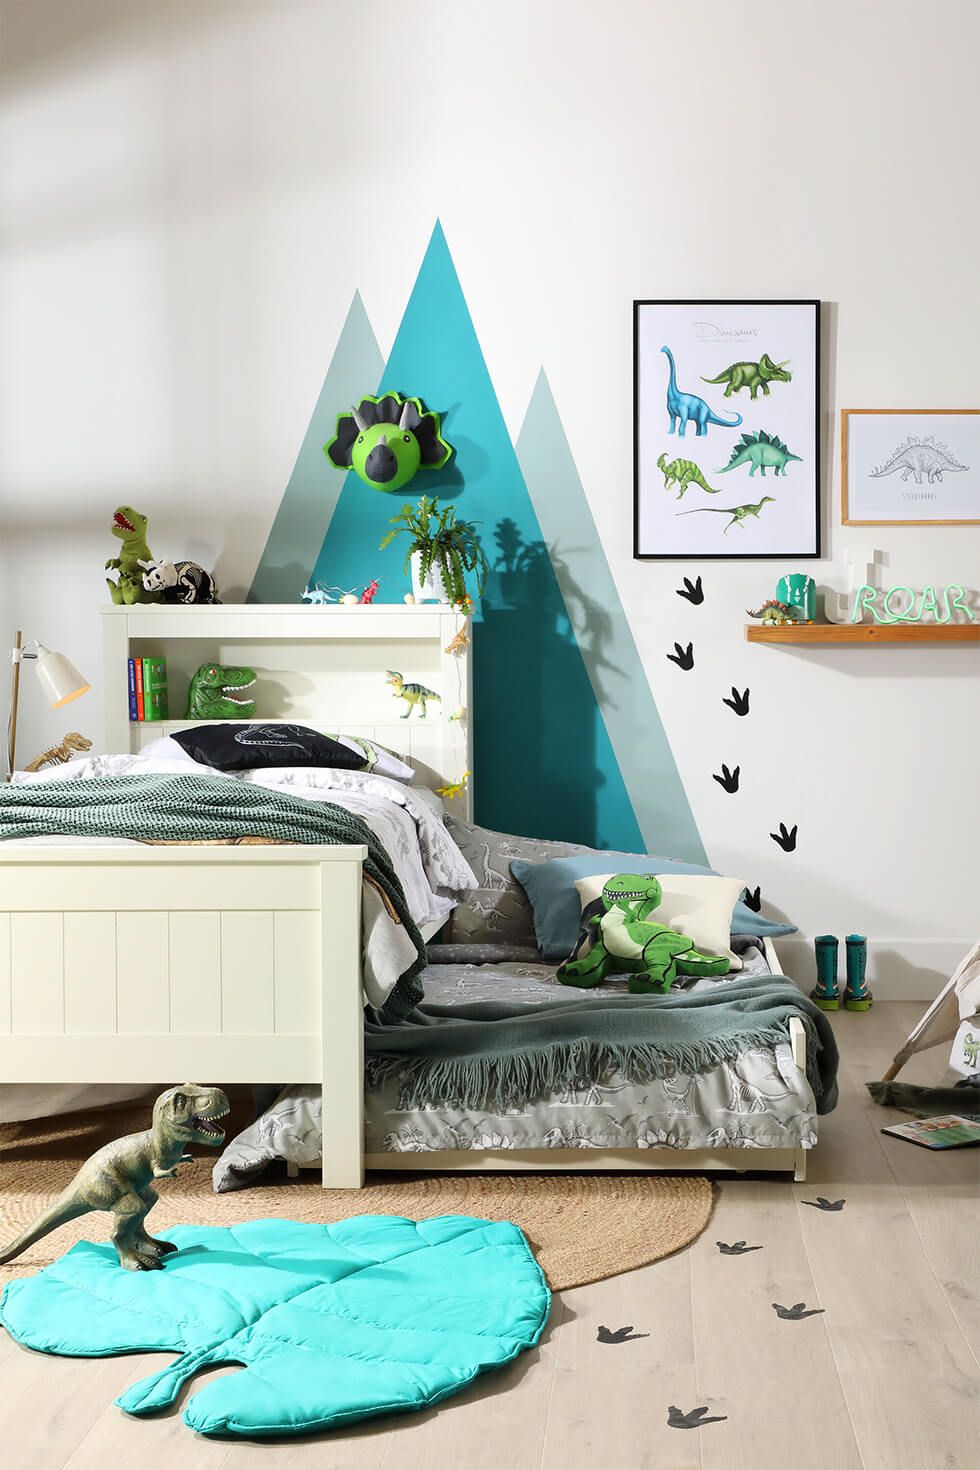 Dinosaur-themed bedroom with trundle bed, soft toys and artwork